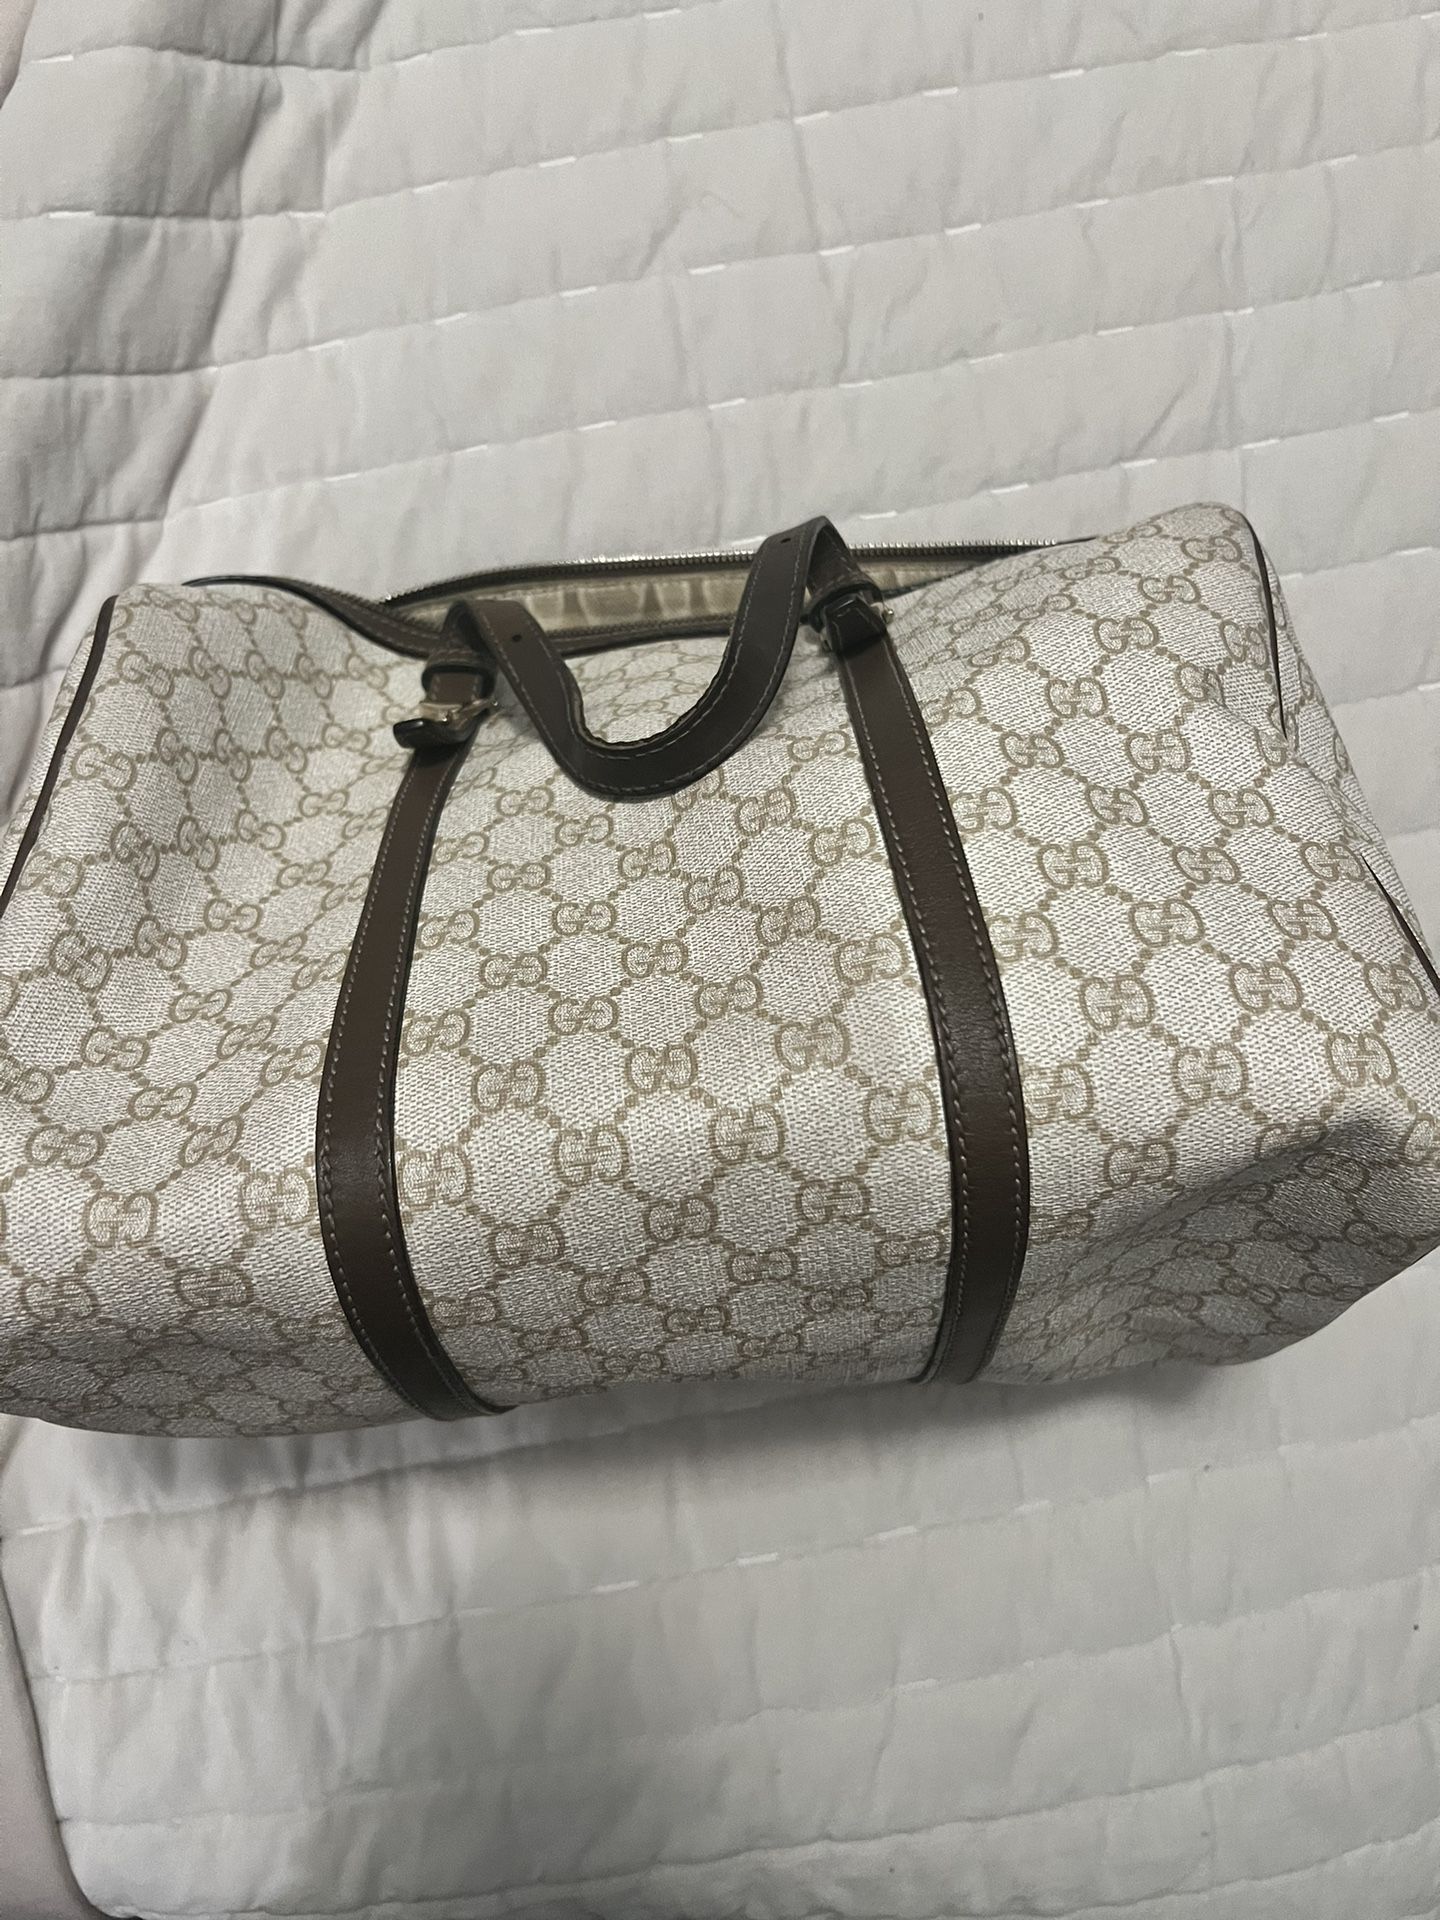 Gucci Hand Bag Authentic 